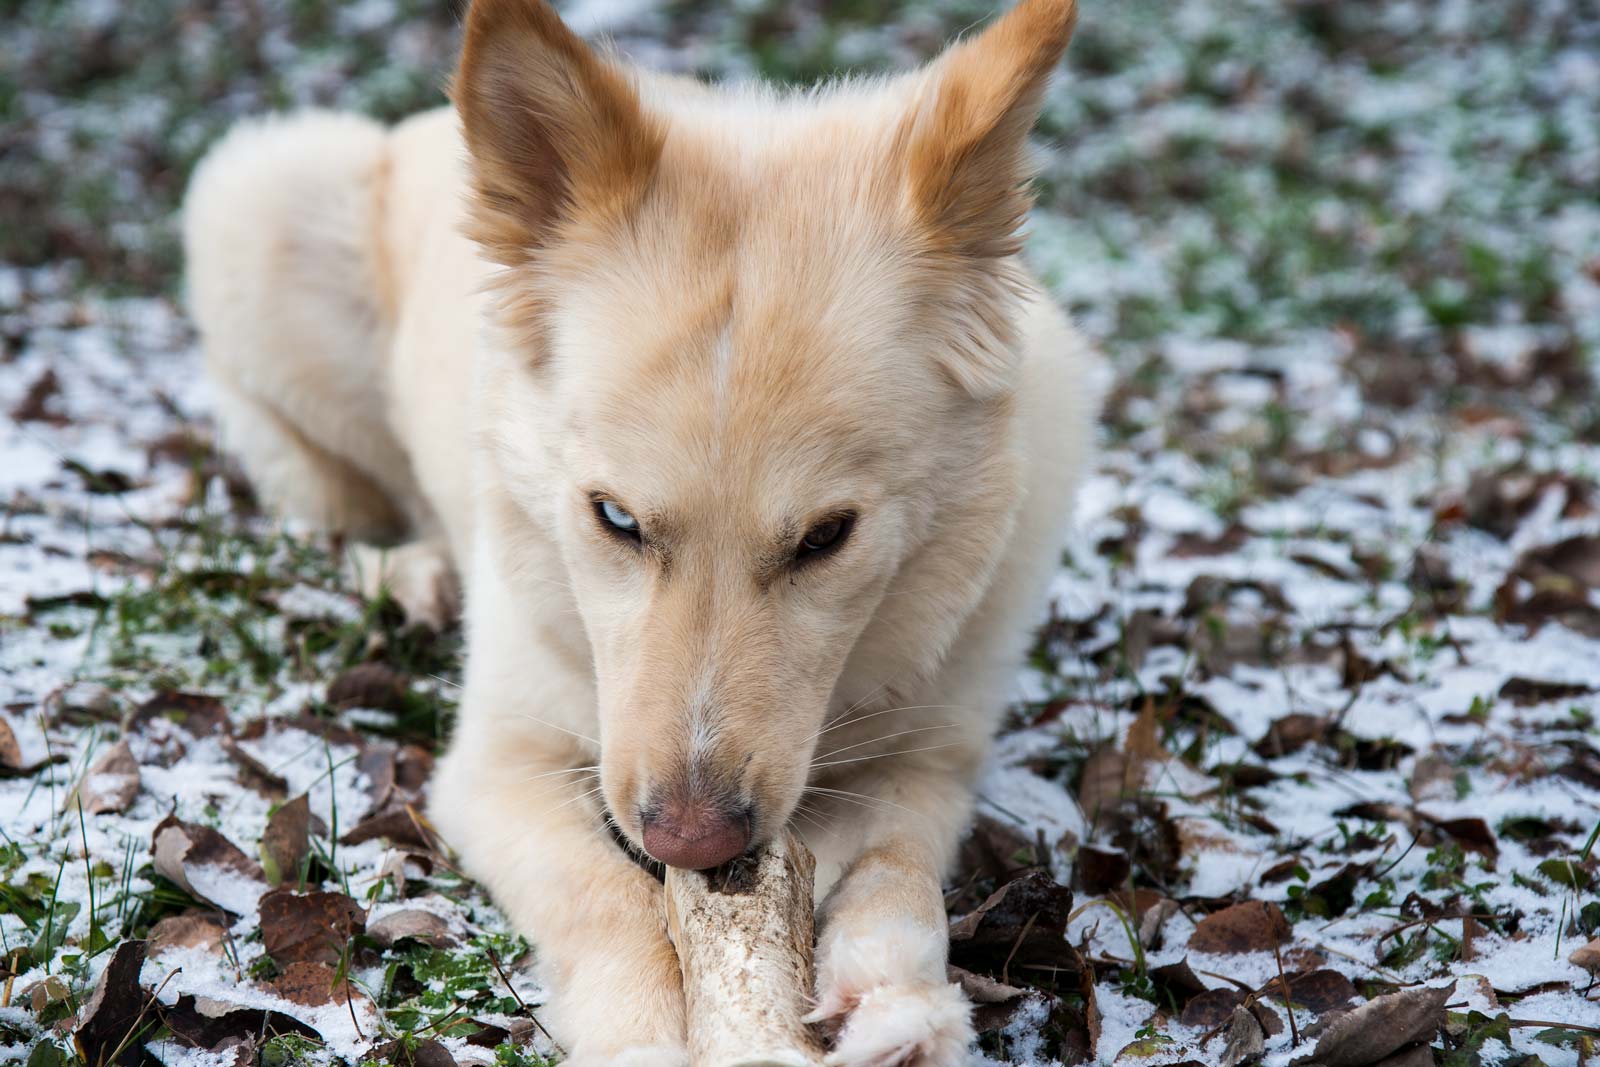 Who cares if the ground has a dusting of snow - Sasha is quite happy with the bone she found.